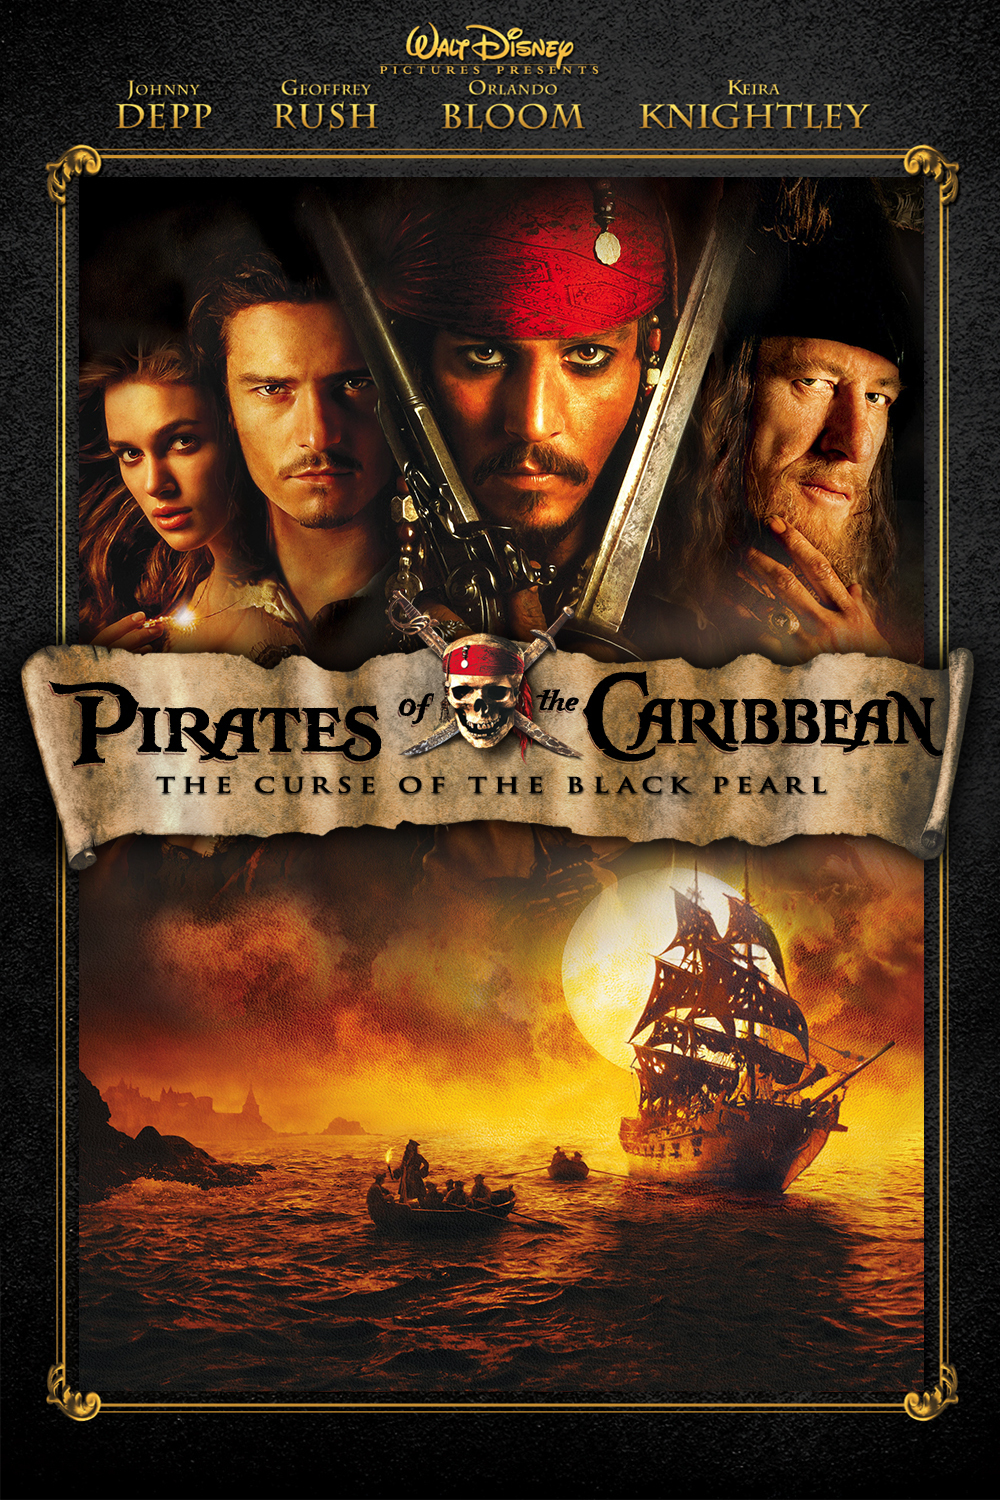 pirates-of-the-caribbean-curse-of-the-black-pearl.jpg